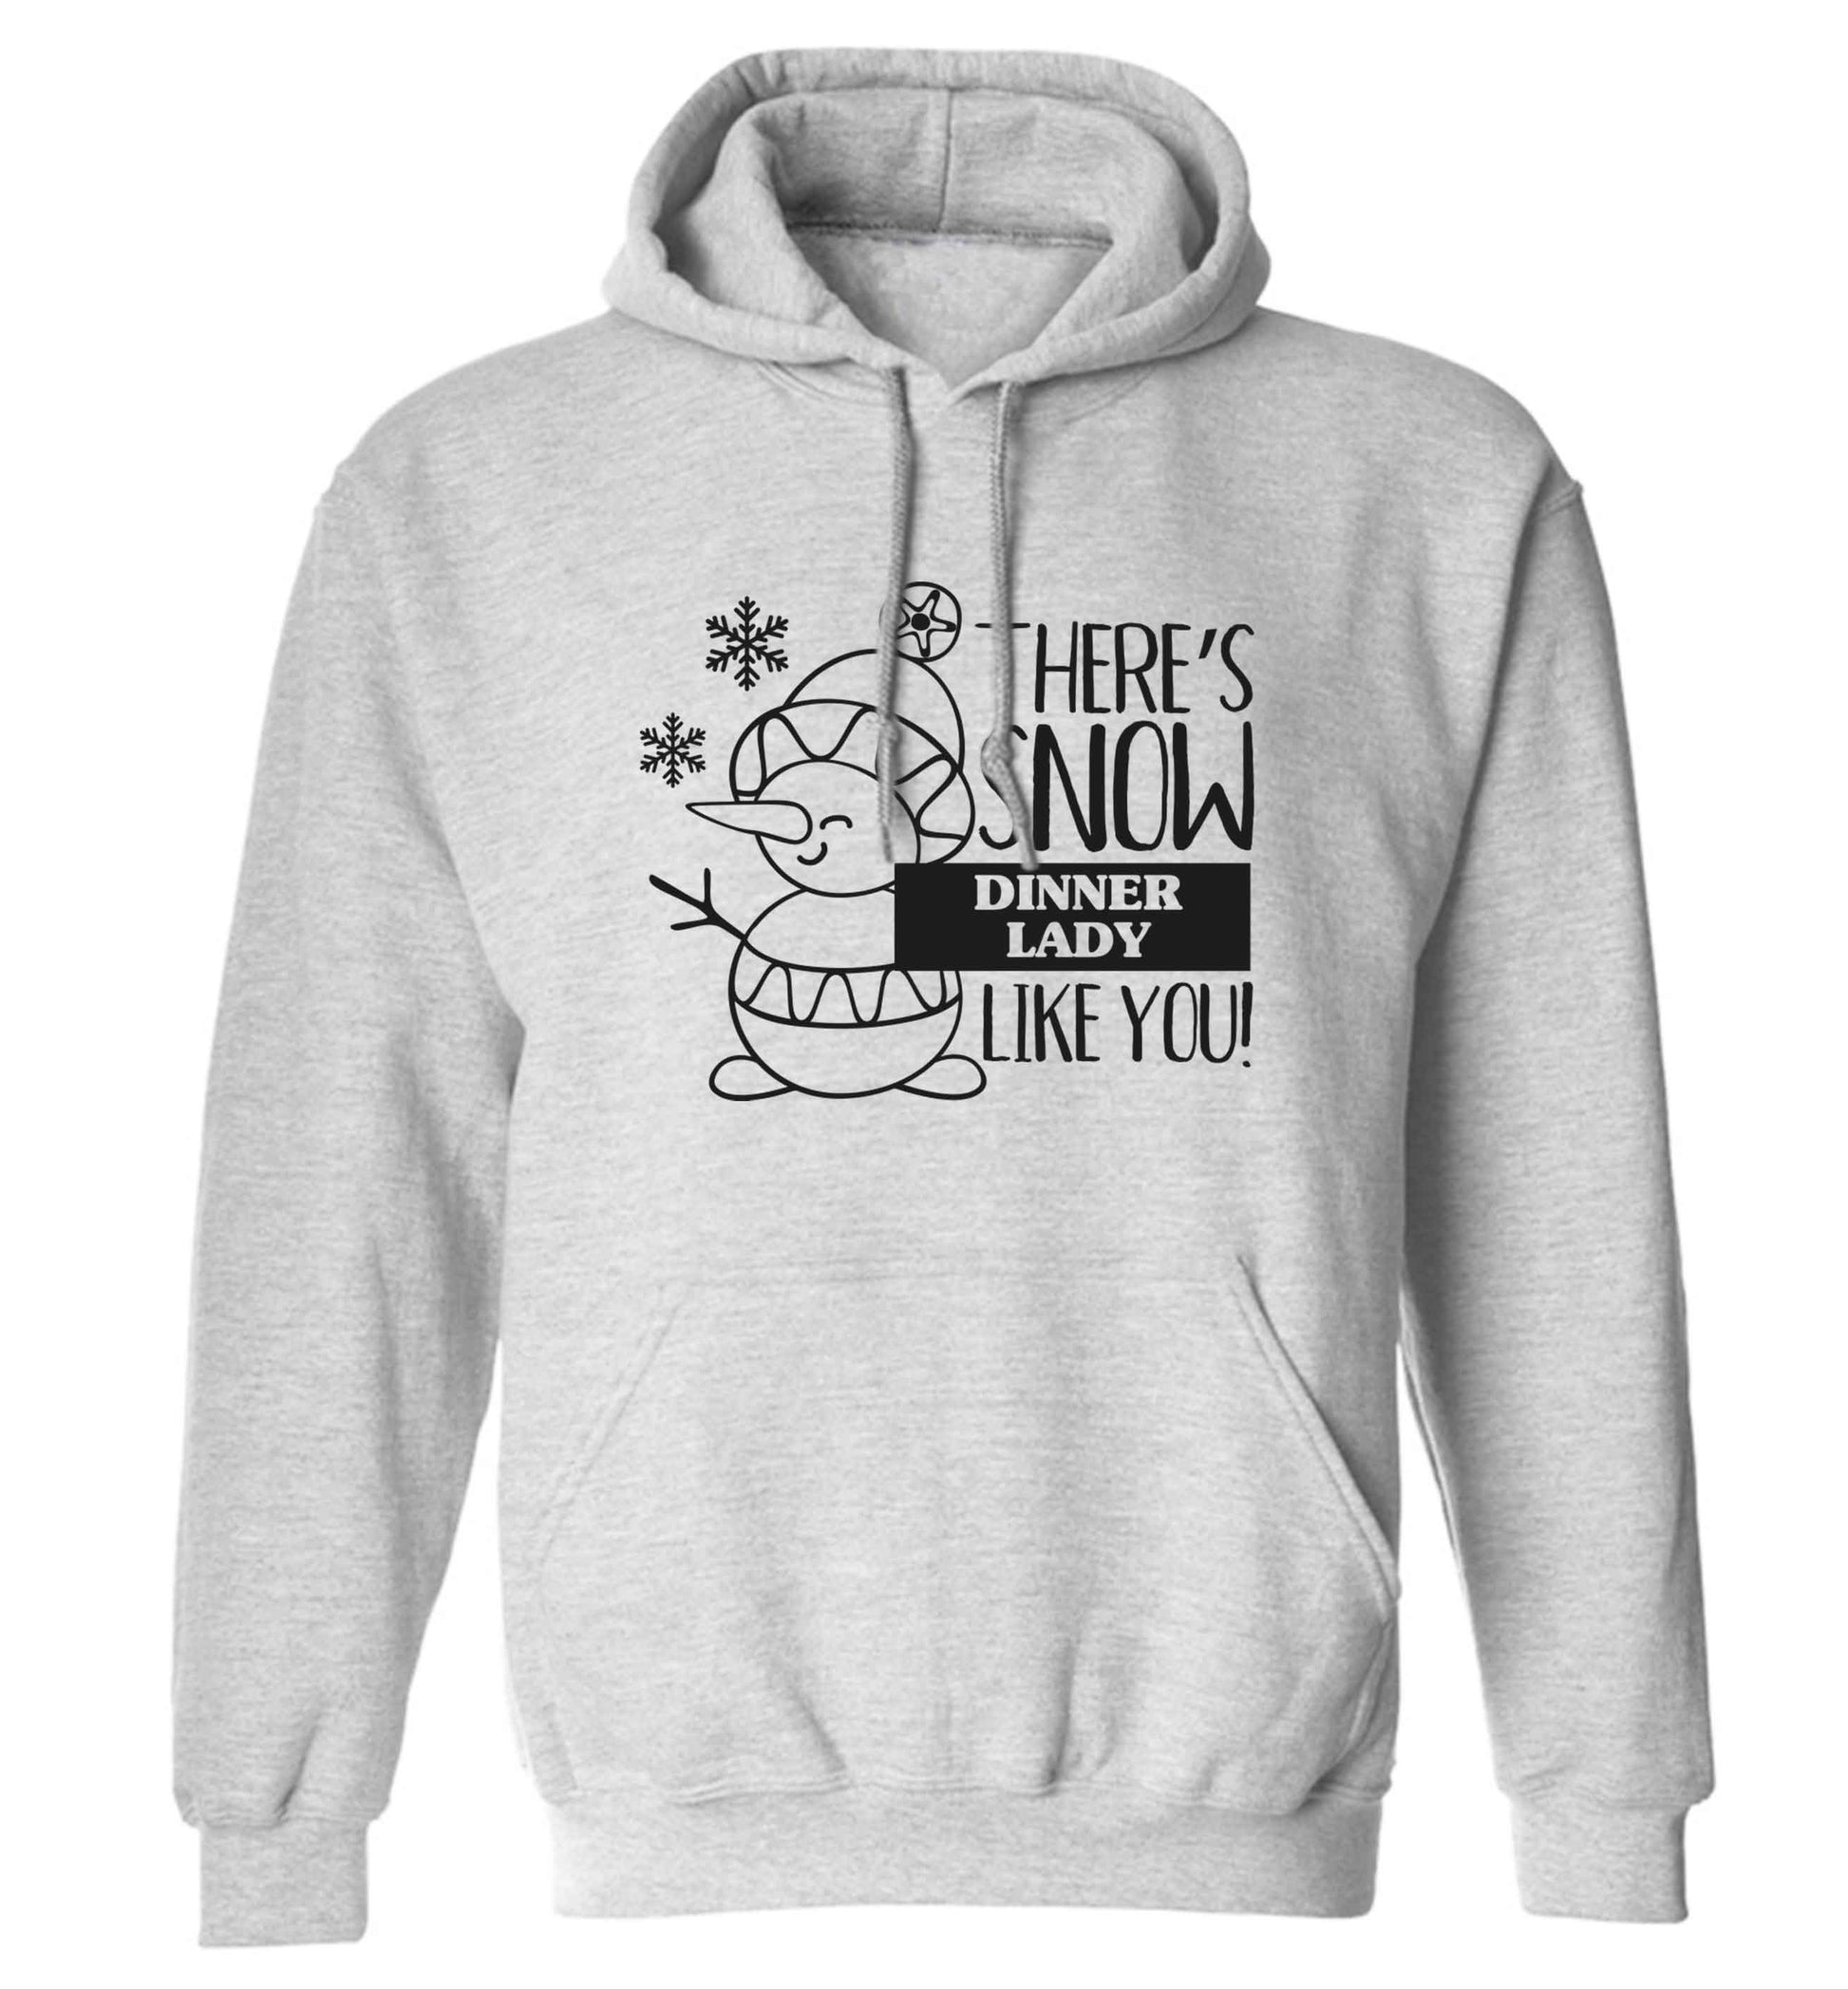 There's snow dinner lady like you adults unisex grey hoodie 2XL